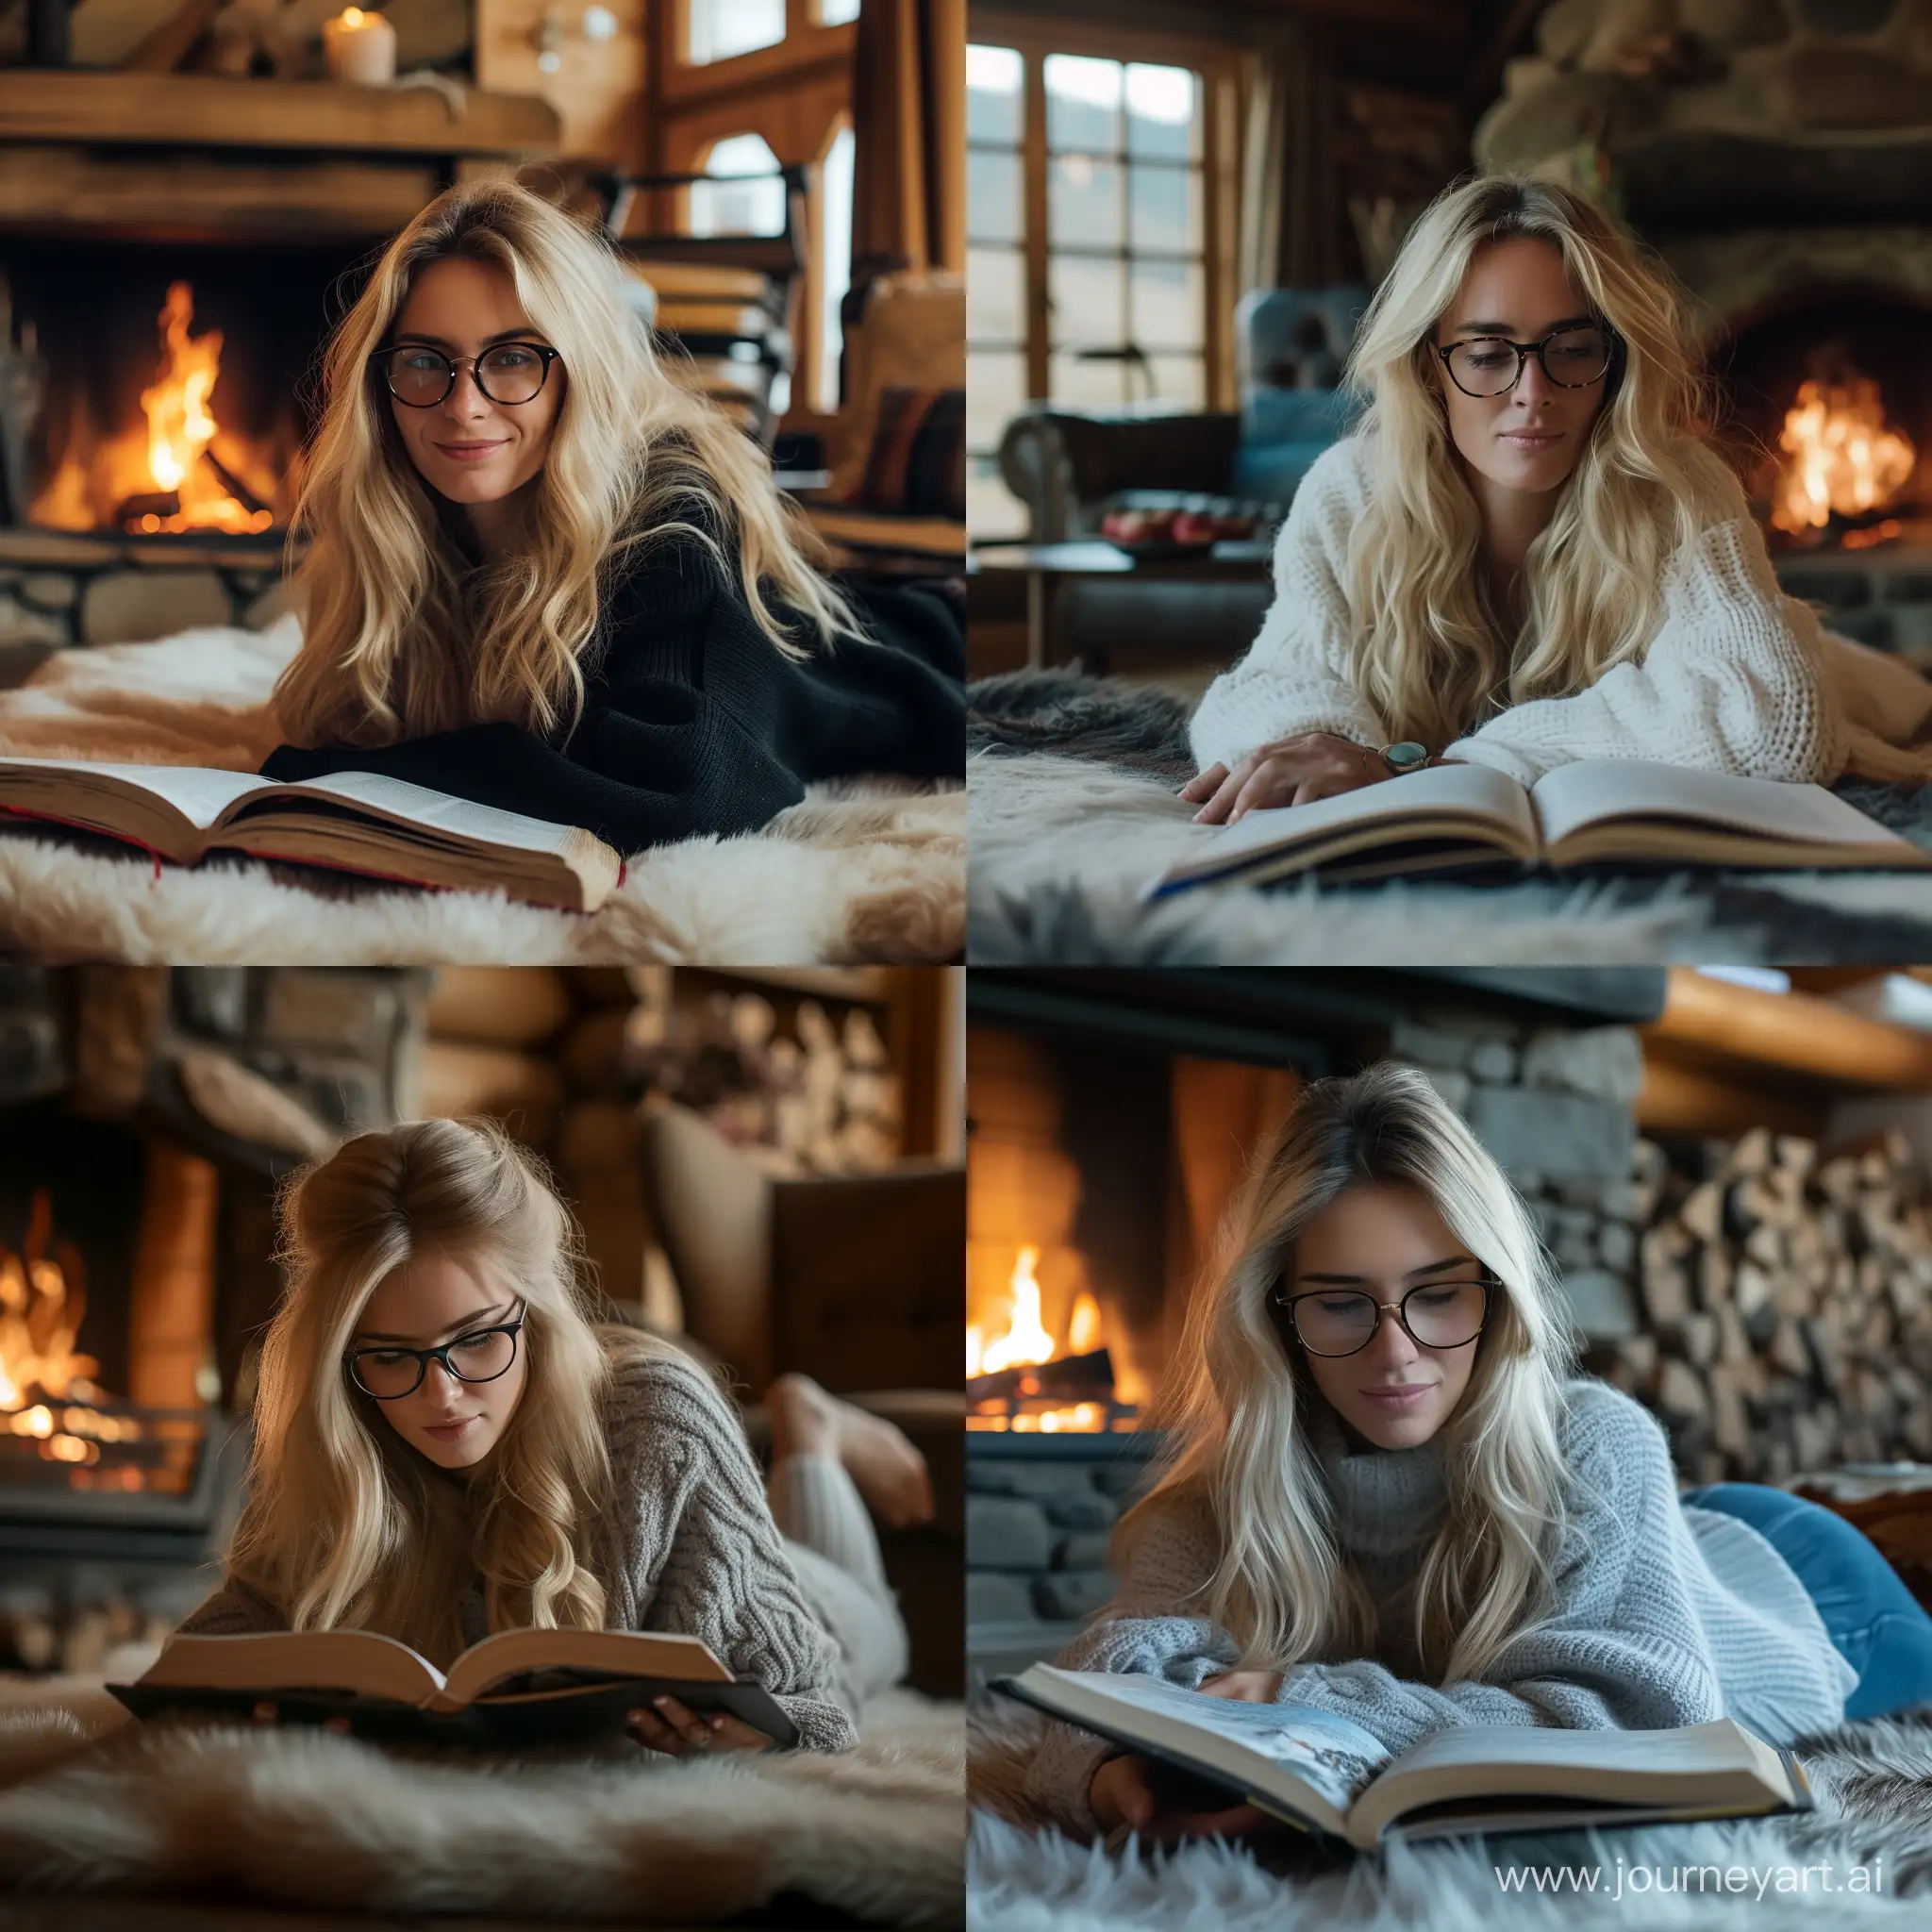 create a real blond hair woman with glasses lying and reading book inside chalet in front of fireplace